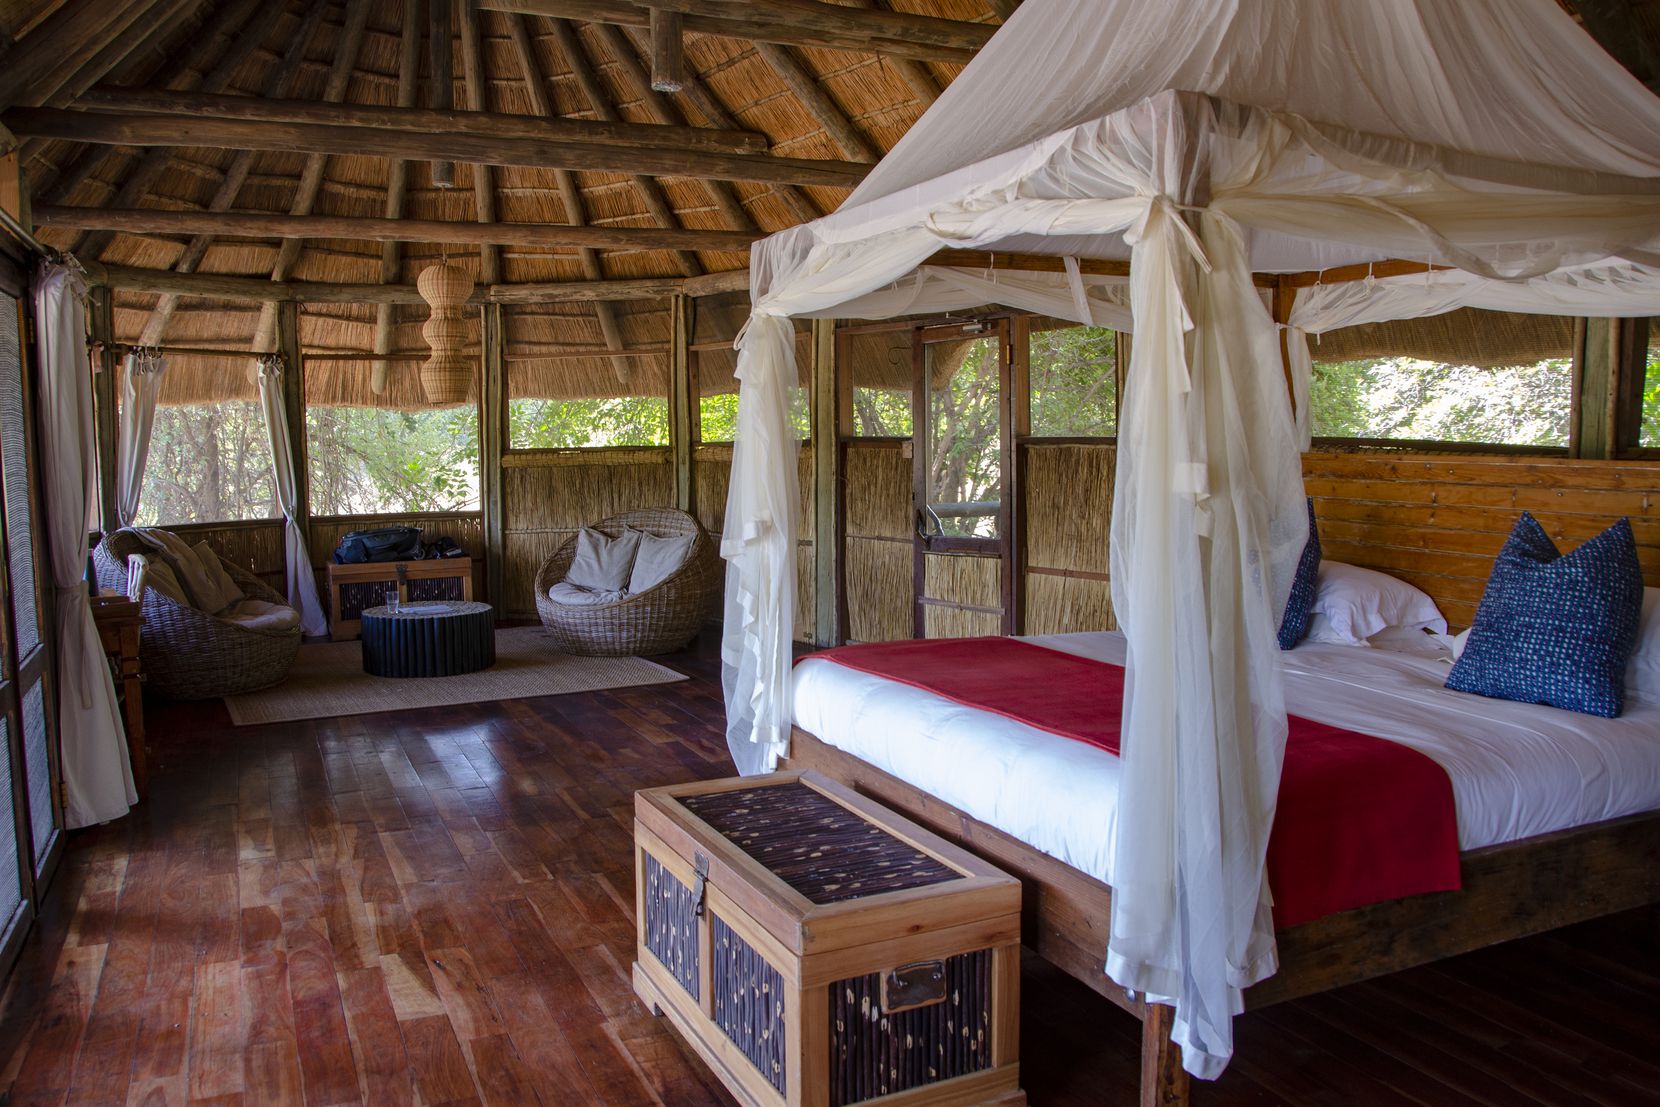 The Bushcamp Co.'s accommodations in Zambia's South Luangwa National Park are rustic and...